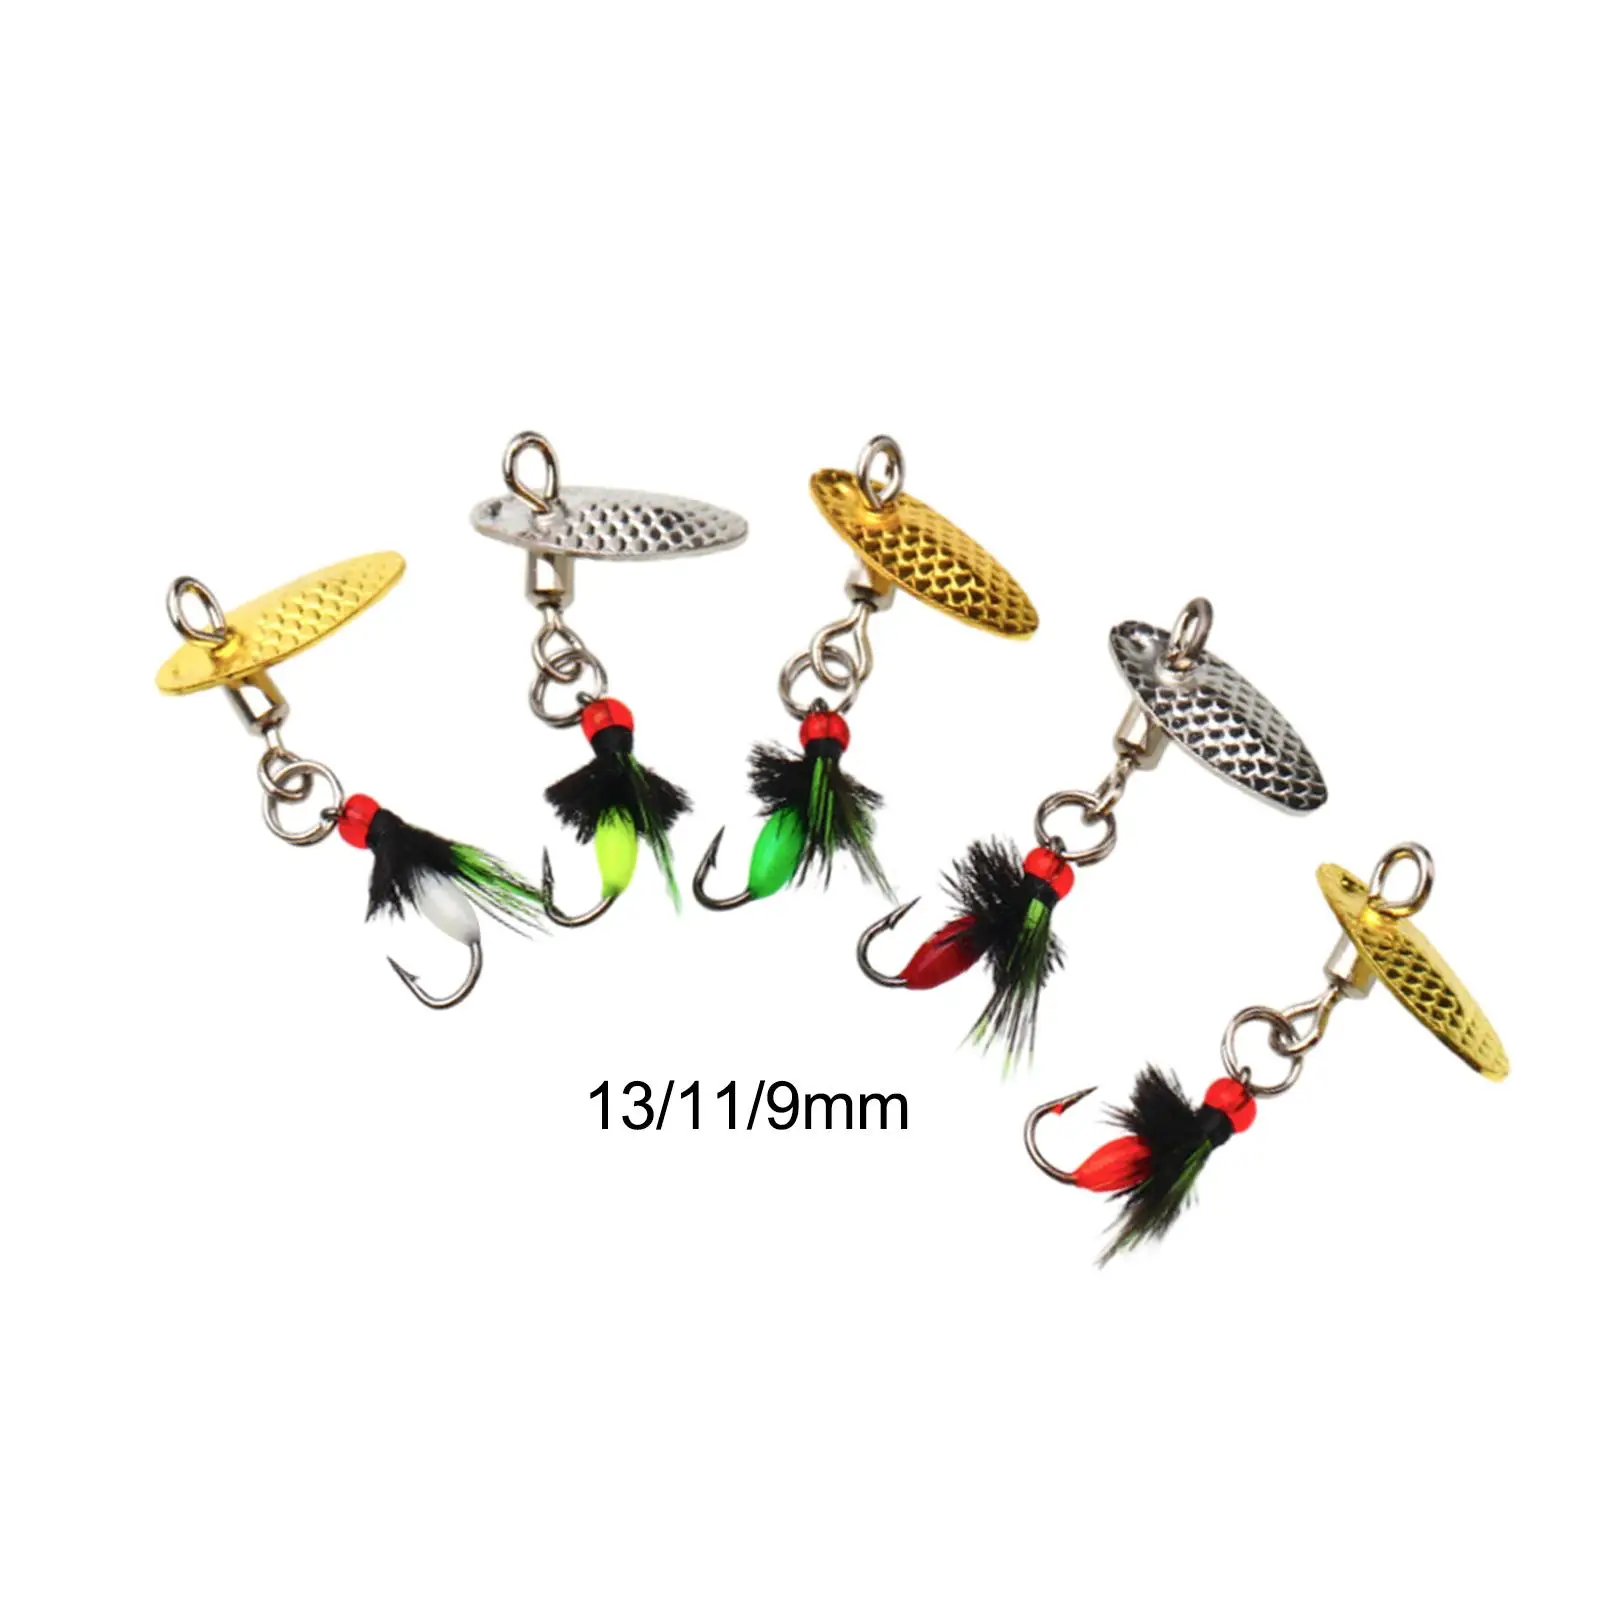 5x Fishing Lures Spinnerbait Trout Lures Fishing Tackle with